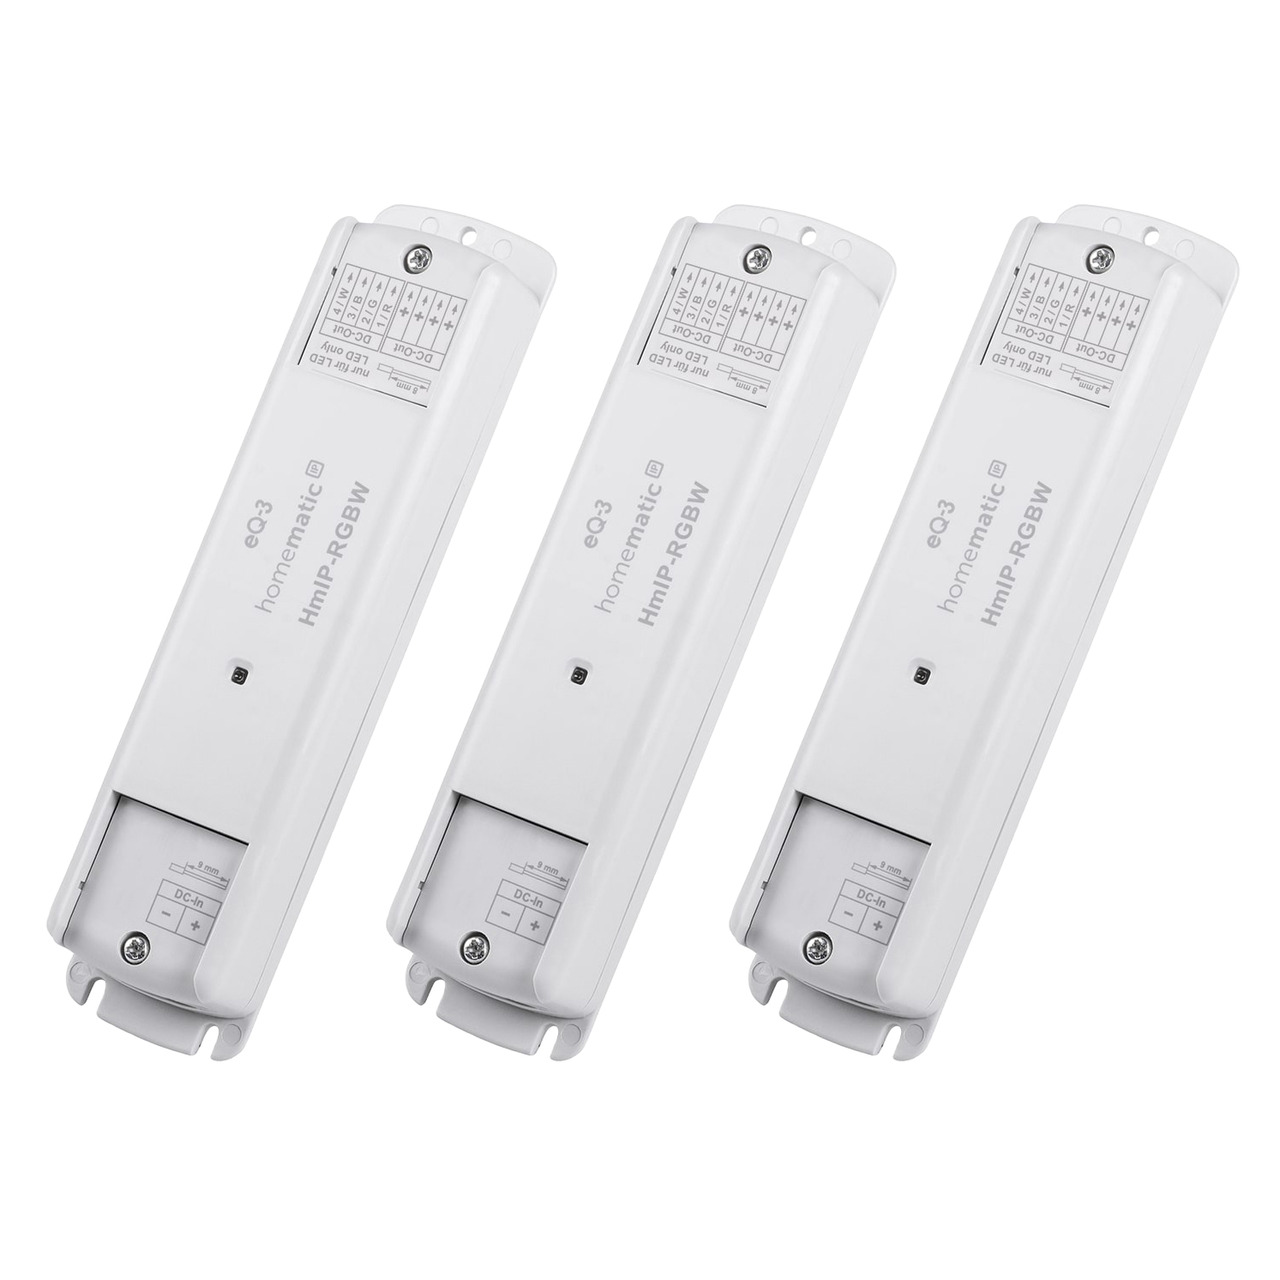 Homematic IP Smart Home 3er-Set LED Controller  RGBW HmIP-RGBW unter Hausautomation